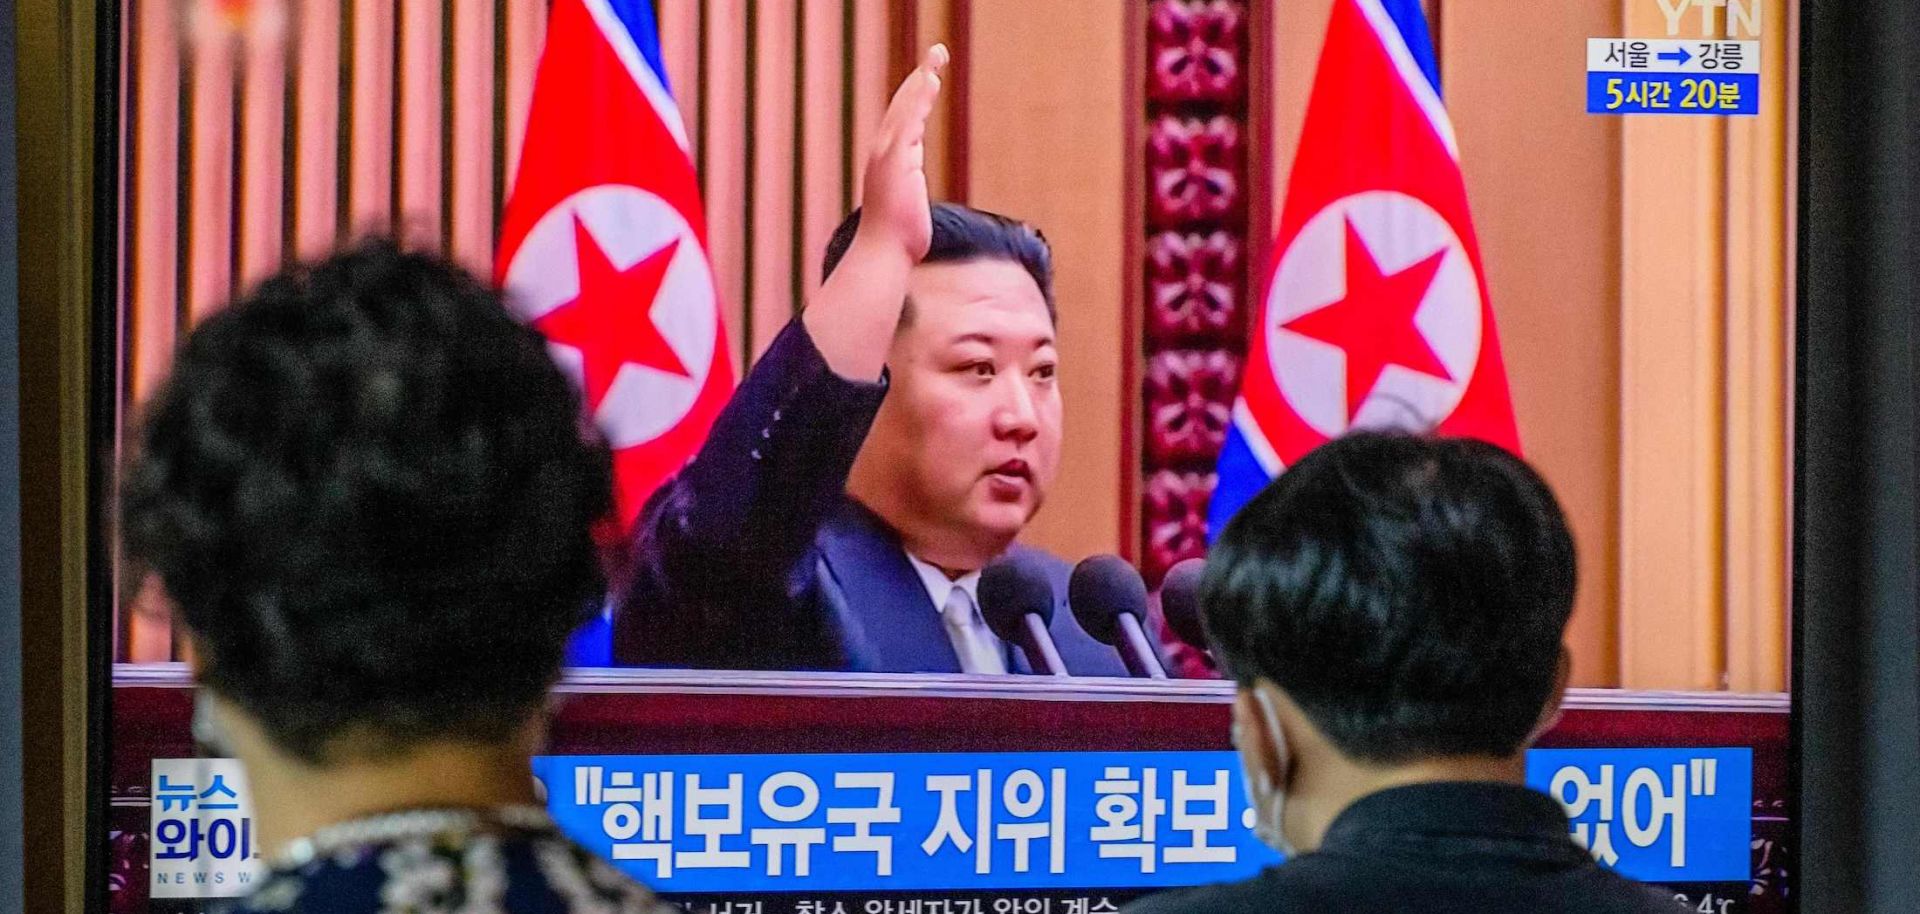 File footage of North Korean leader Kim Jong Un is seen on a television screen at a train station in Seoul, South Korea, on Sept. 9, 2022. 